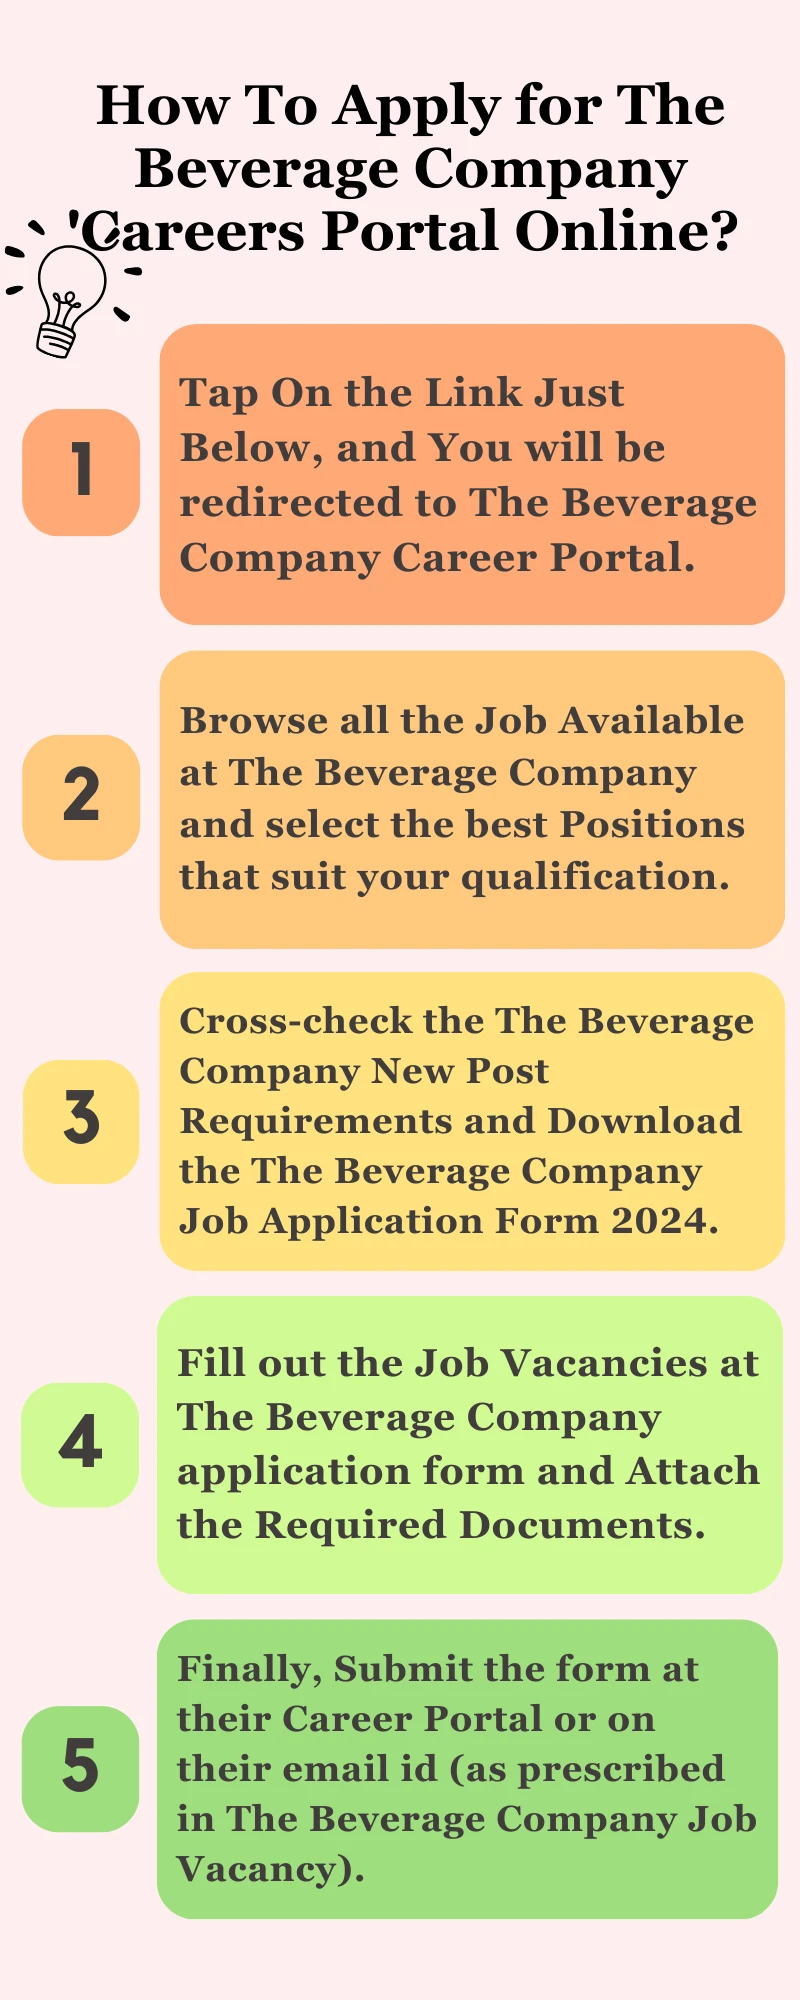 How To Apply for The Beverage Company Careers Portal Online?